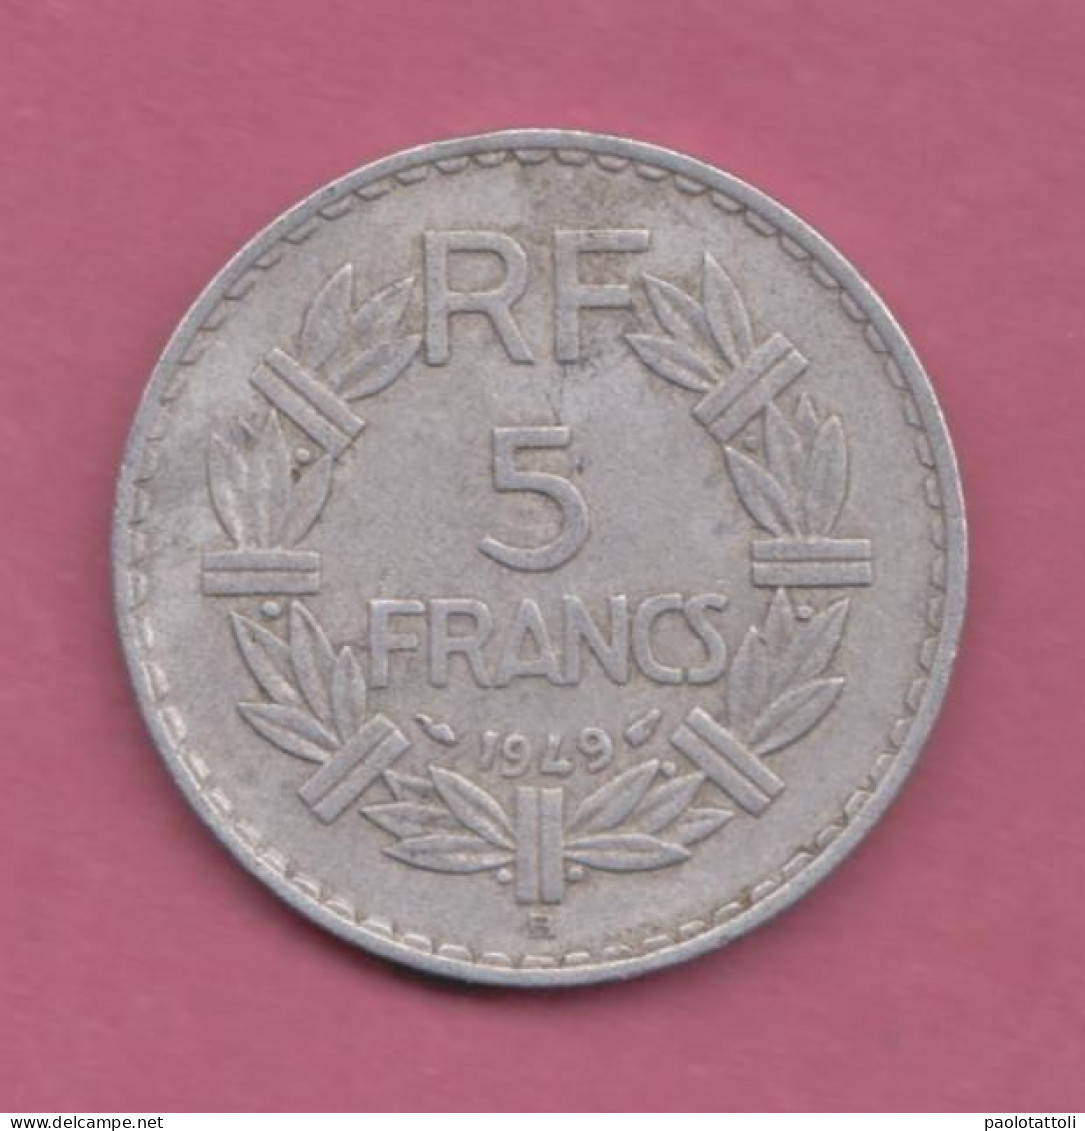 France, 1949- 5 Francs.Lavrillier-Aluminium- Obverse Laureate Head. Reverse Denomination Within Sectioned Wreath- - 5 Francs